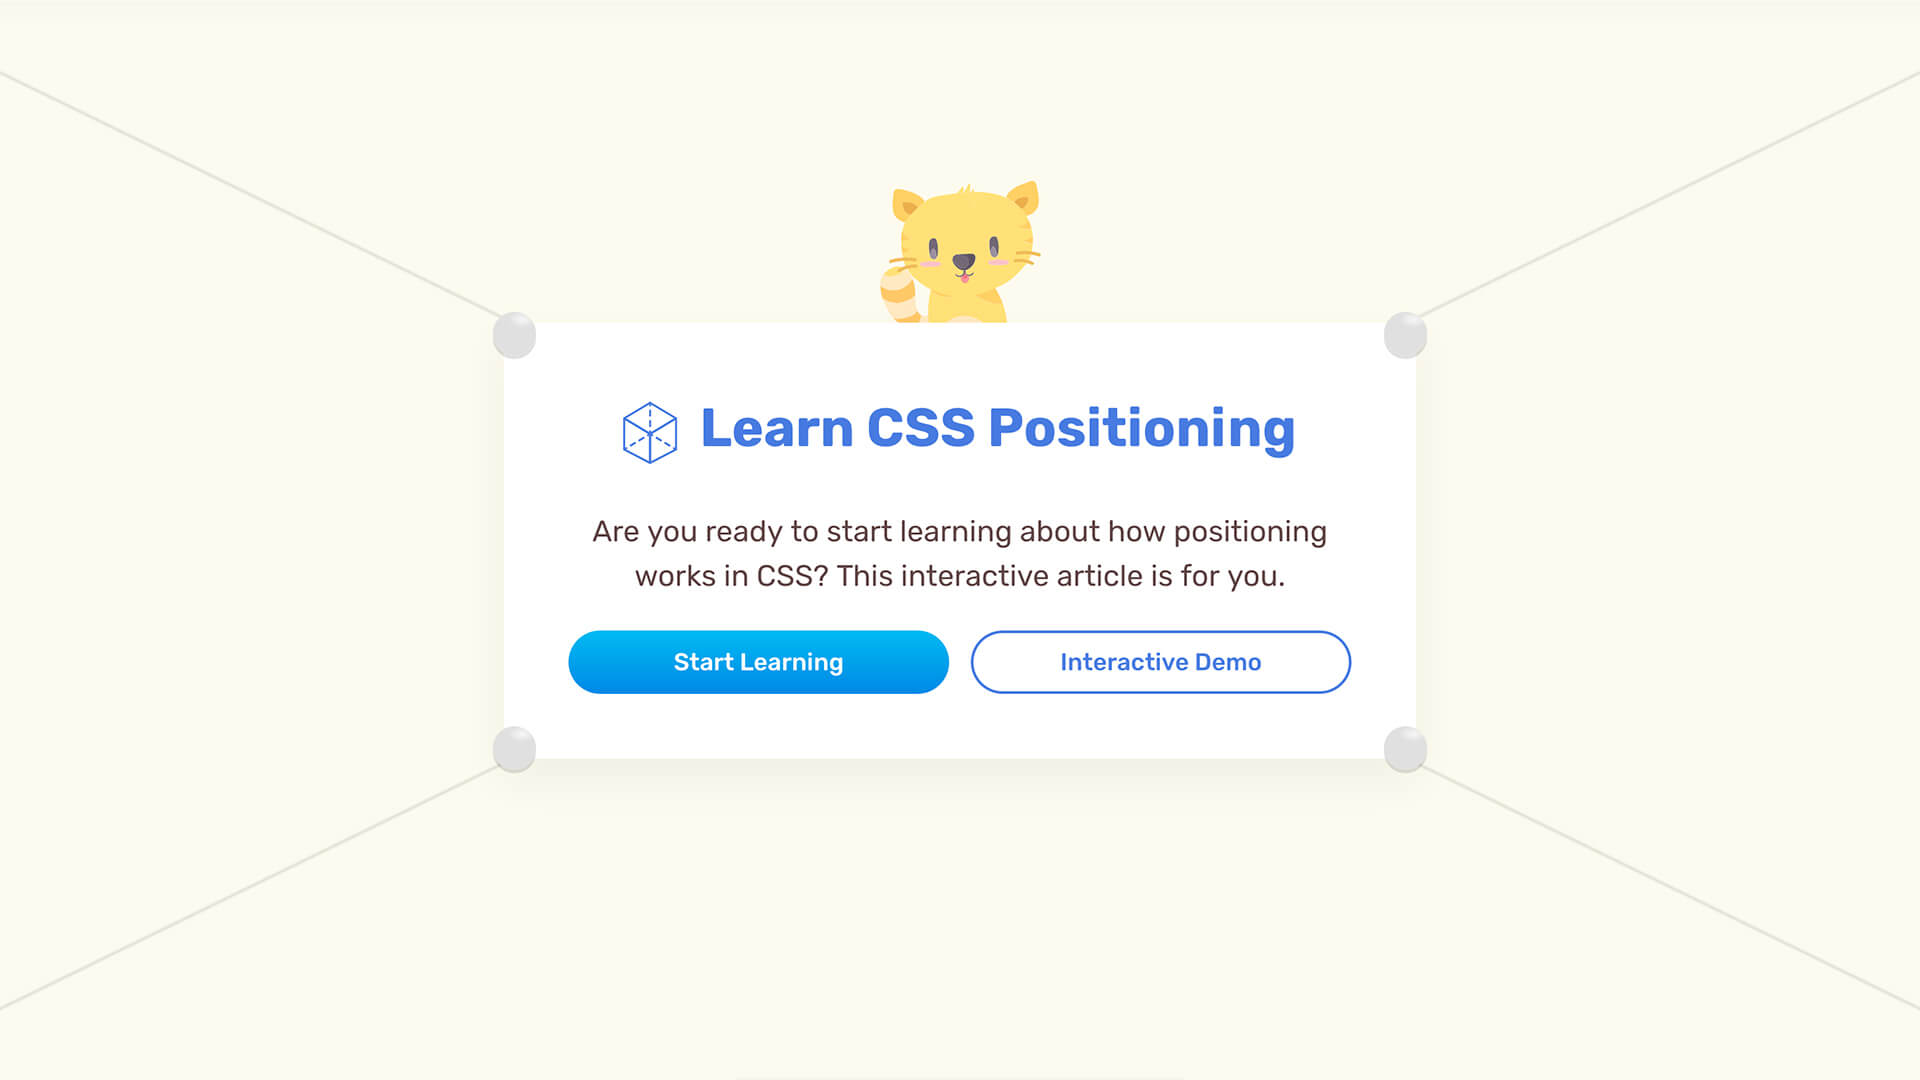 Learn CSS Positioning